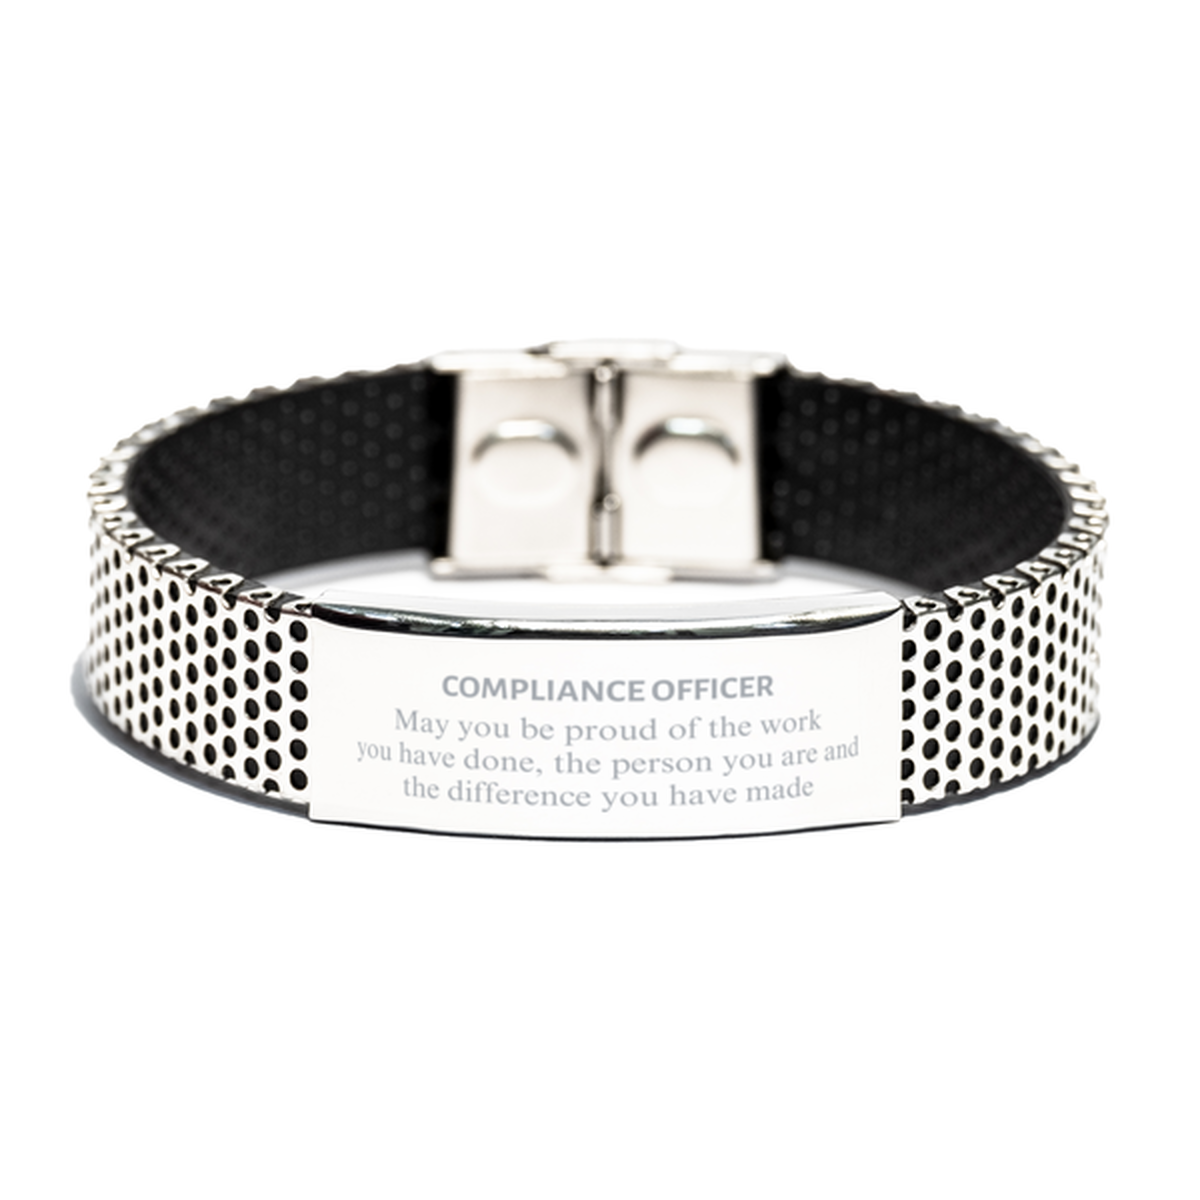 Compliance Officer May you be proud of the work you have done, Retirement Compliance Officer Stainless Steel Bracelet for Colleague Appreciation Gifts Amazing for Compliance Officer